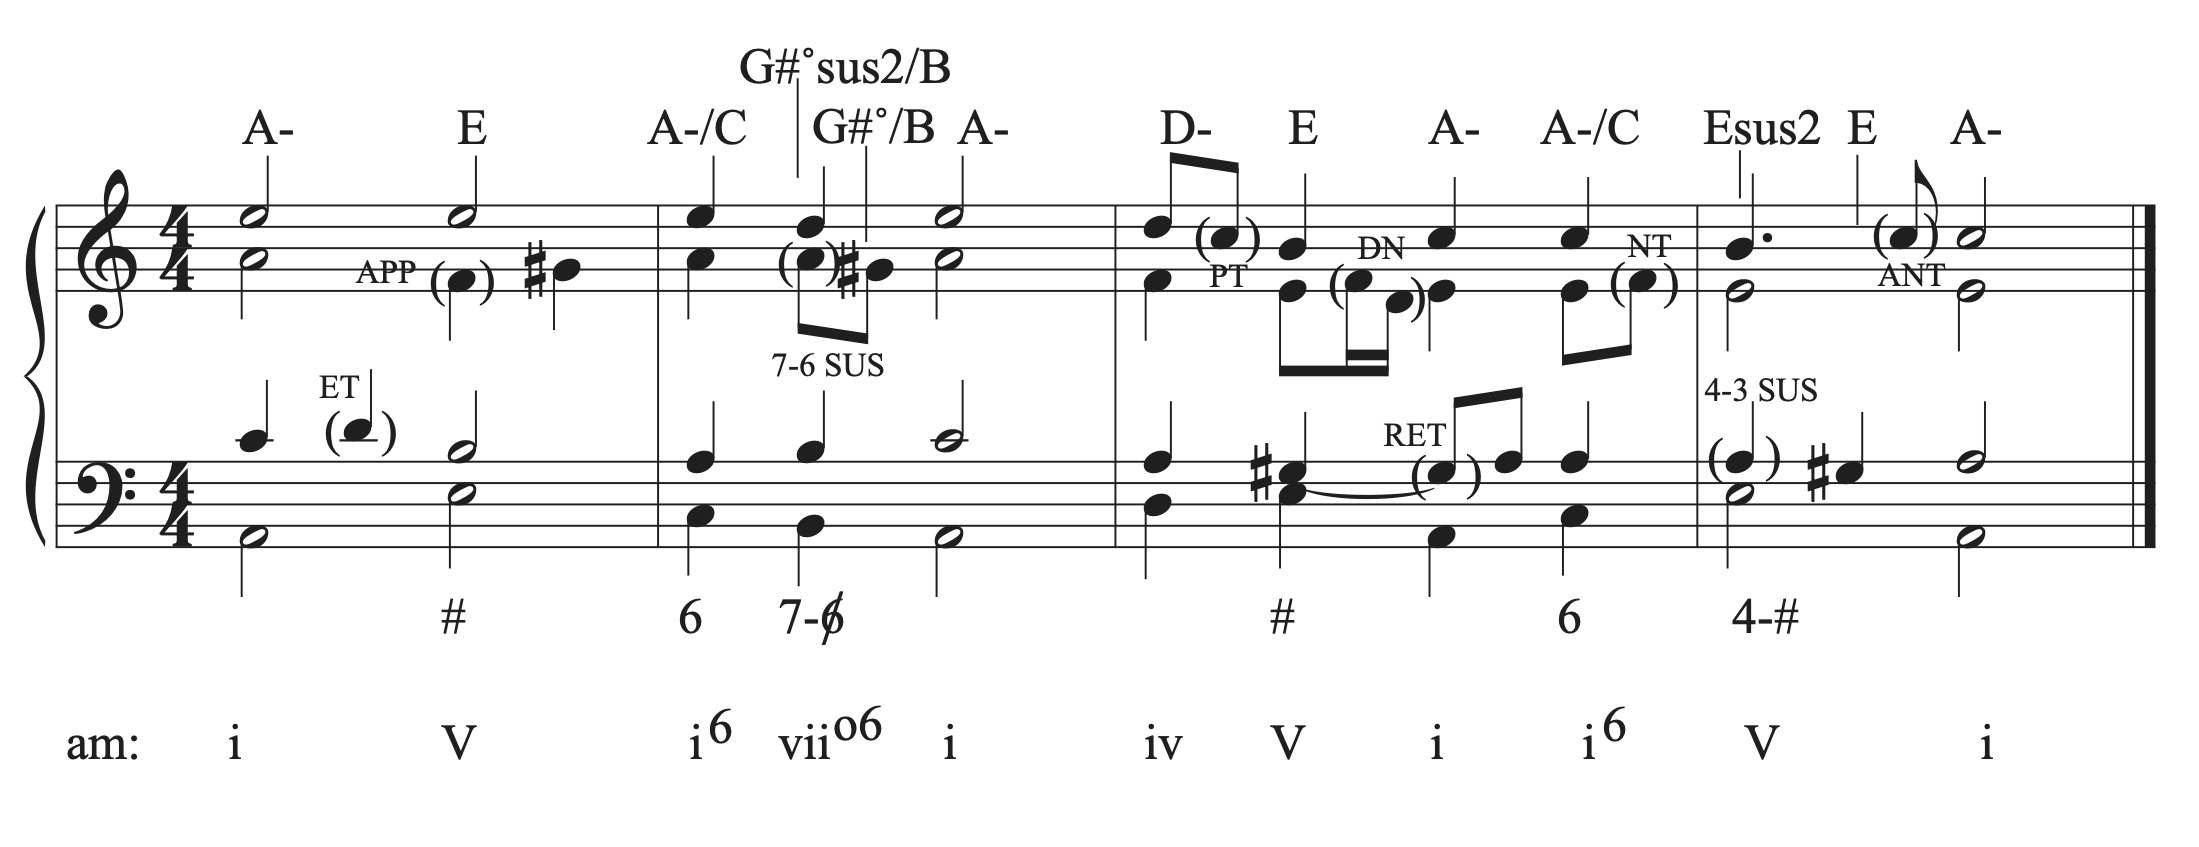 The musical example in A minor with an anticipation added.